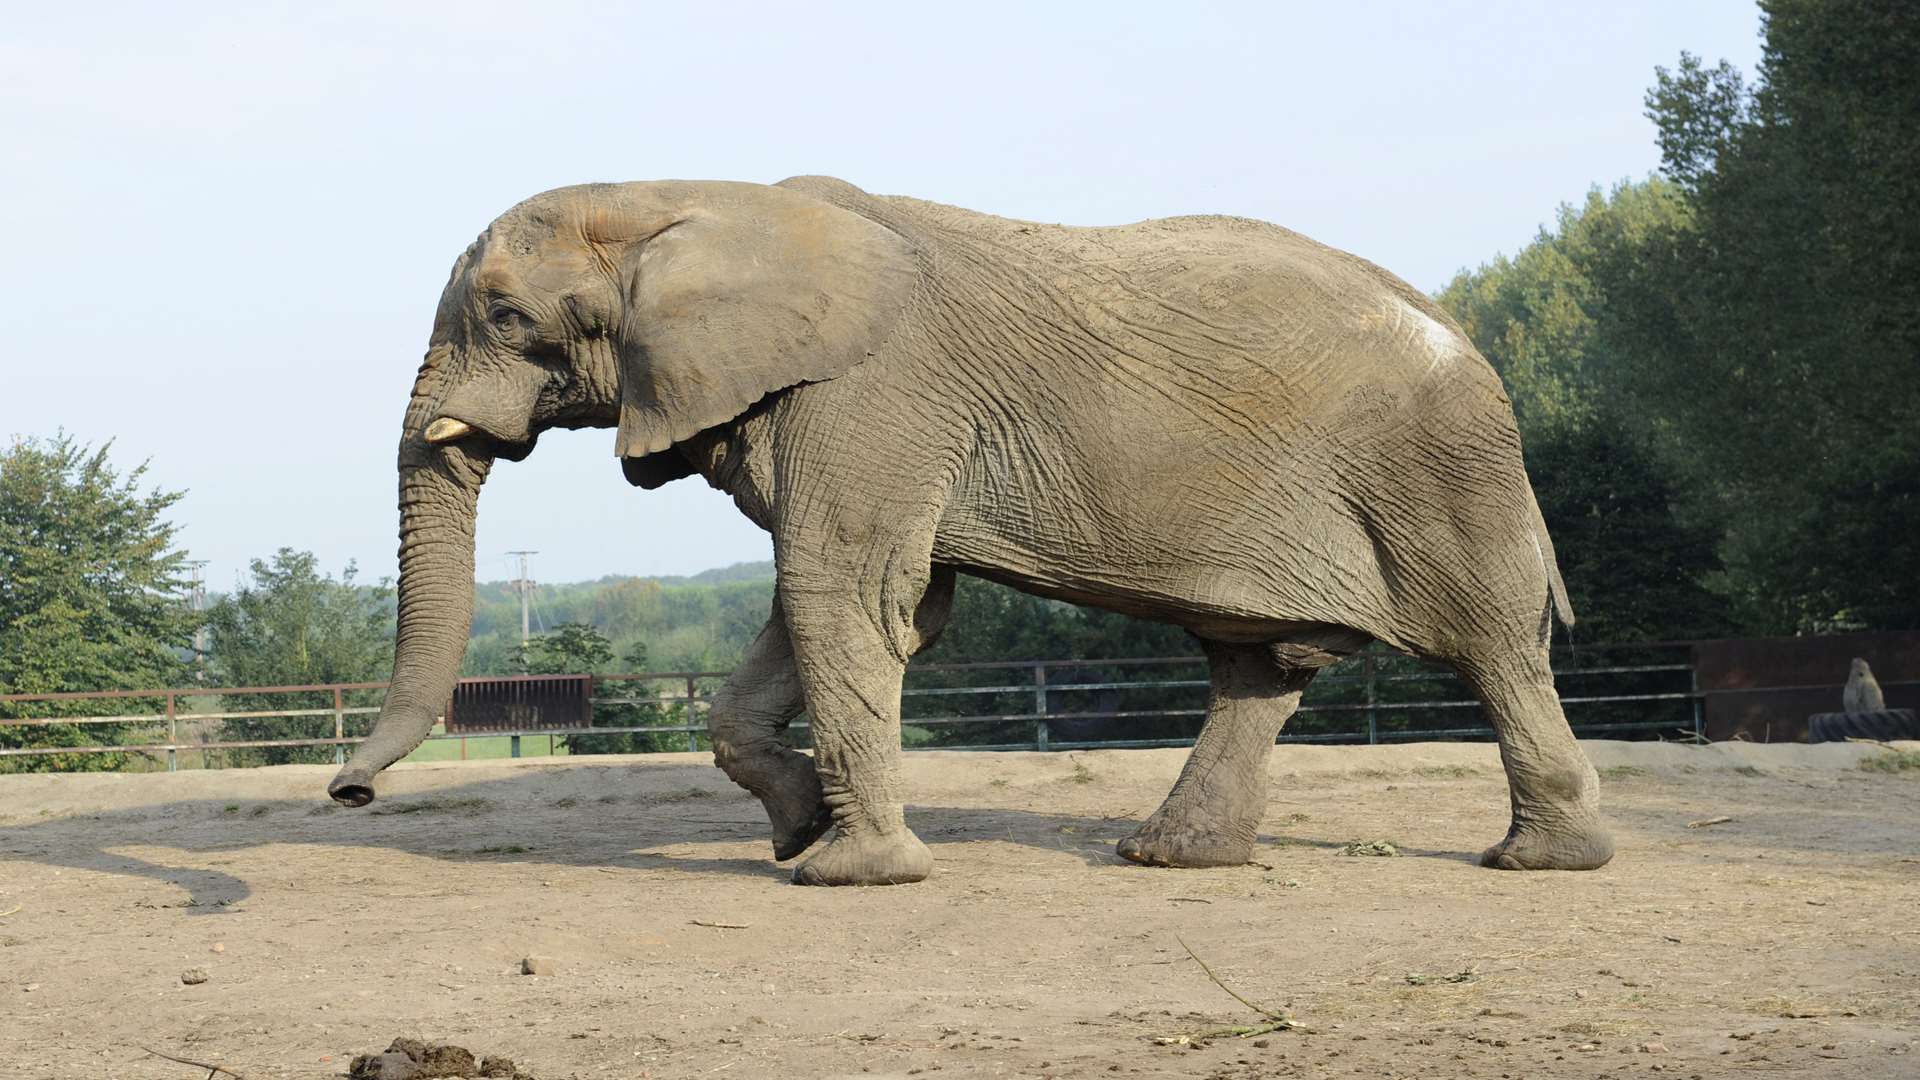 Jums is one of the biggest bull elephants in Europe